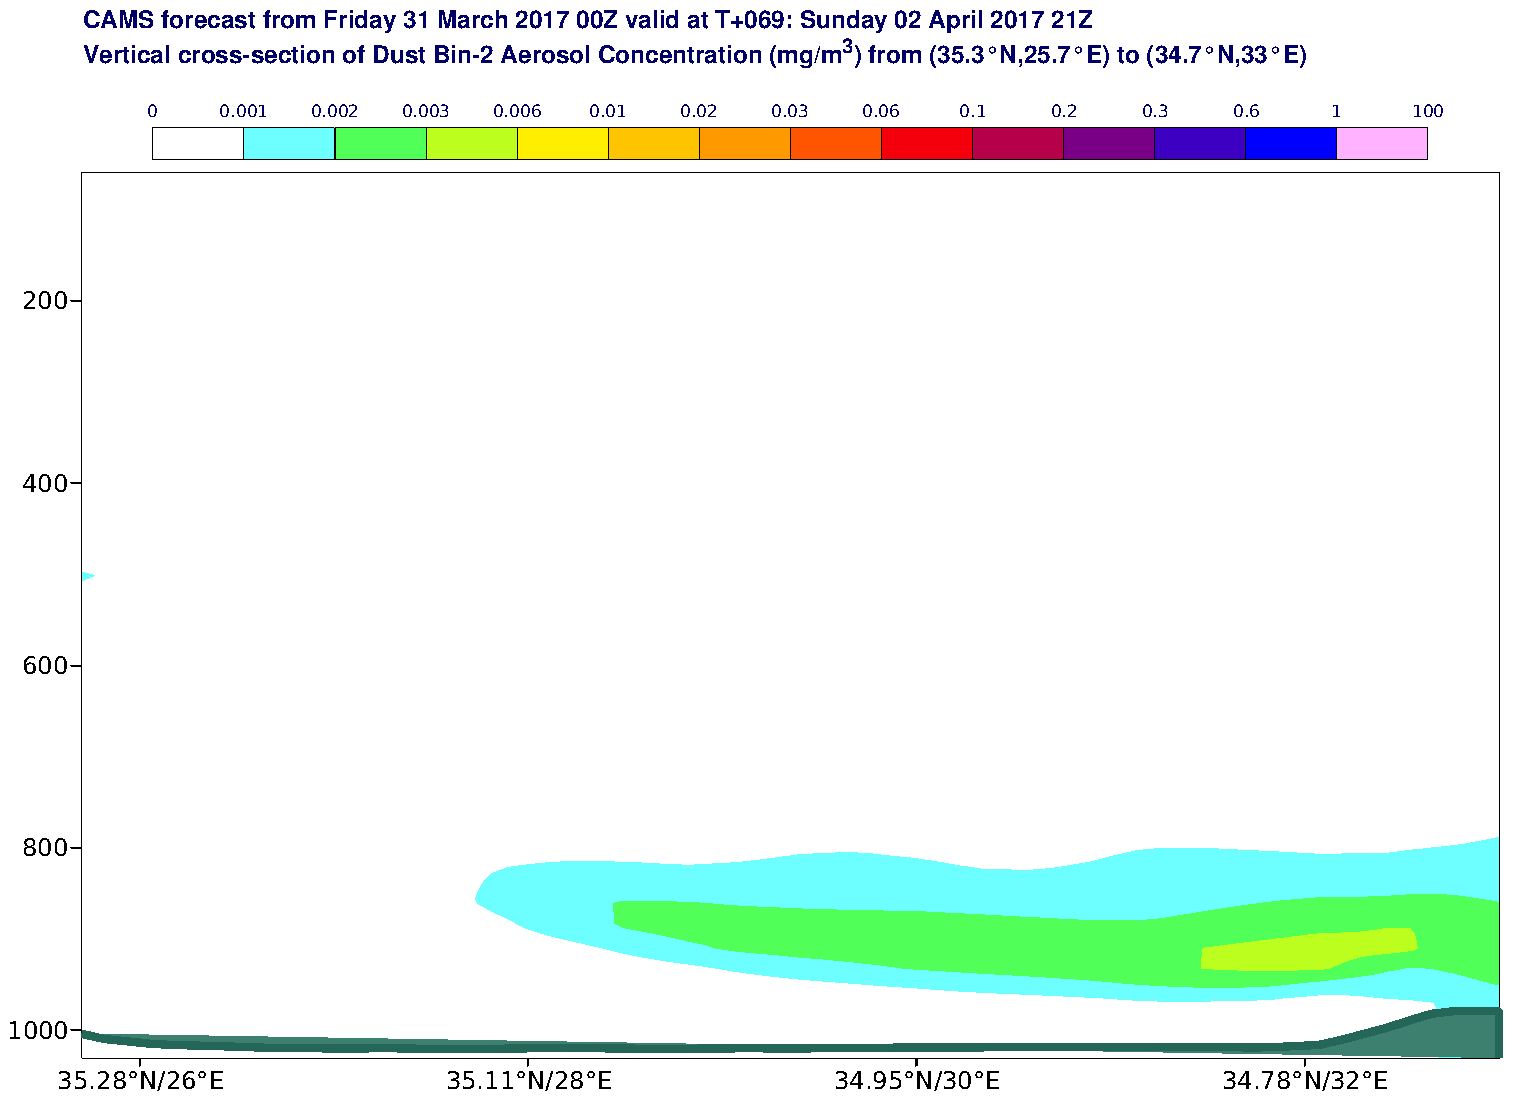 Vertical cross-section of Dust Bin-2 Aerosol Concentration (mg/m3) valid at T69 - 2017-04-02 21:00